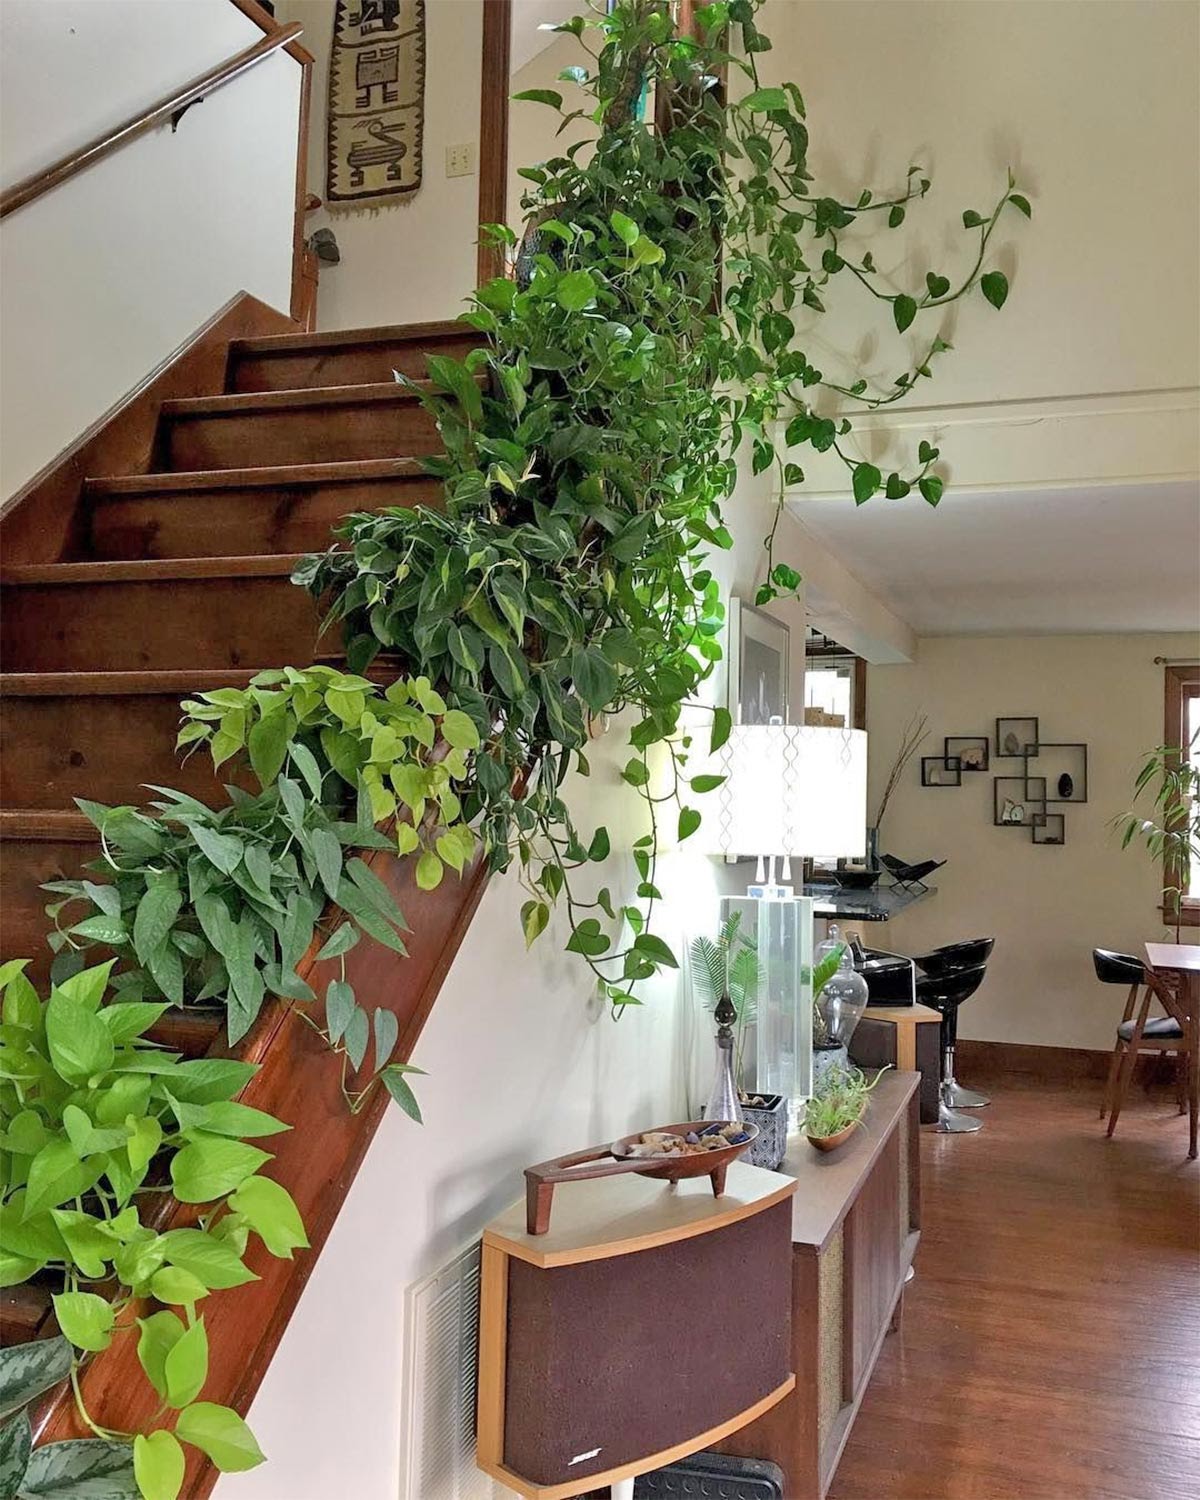 Wall trellis placed along the stairs